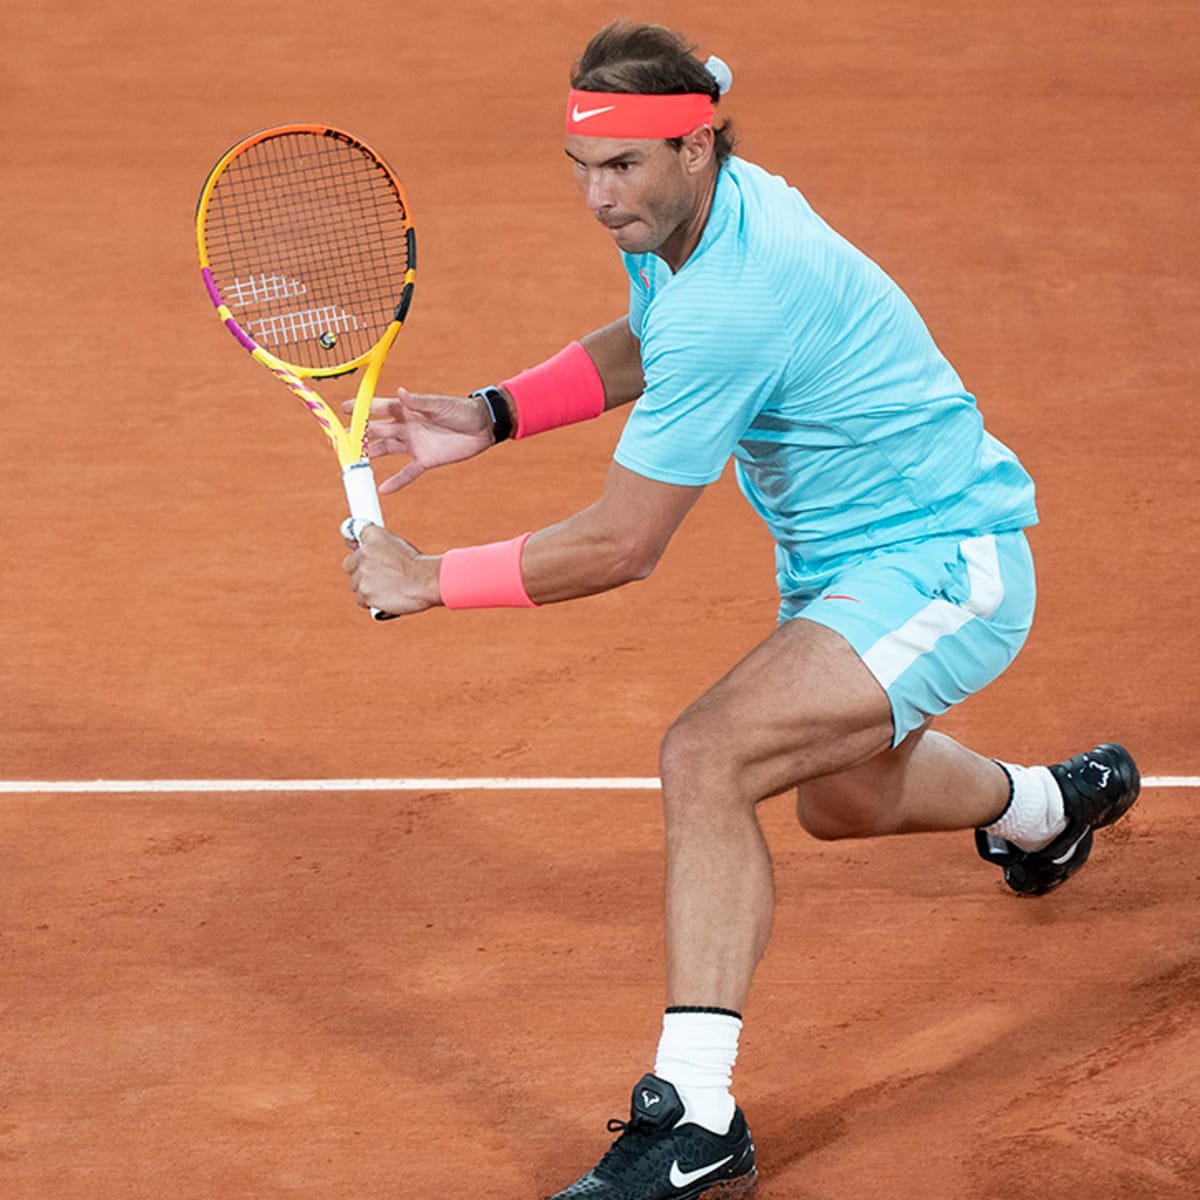 French Open 2021 Nadal Djokovic Swiatek Barty Are Top Contenders Sports Illustrated